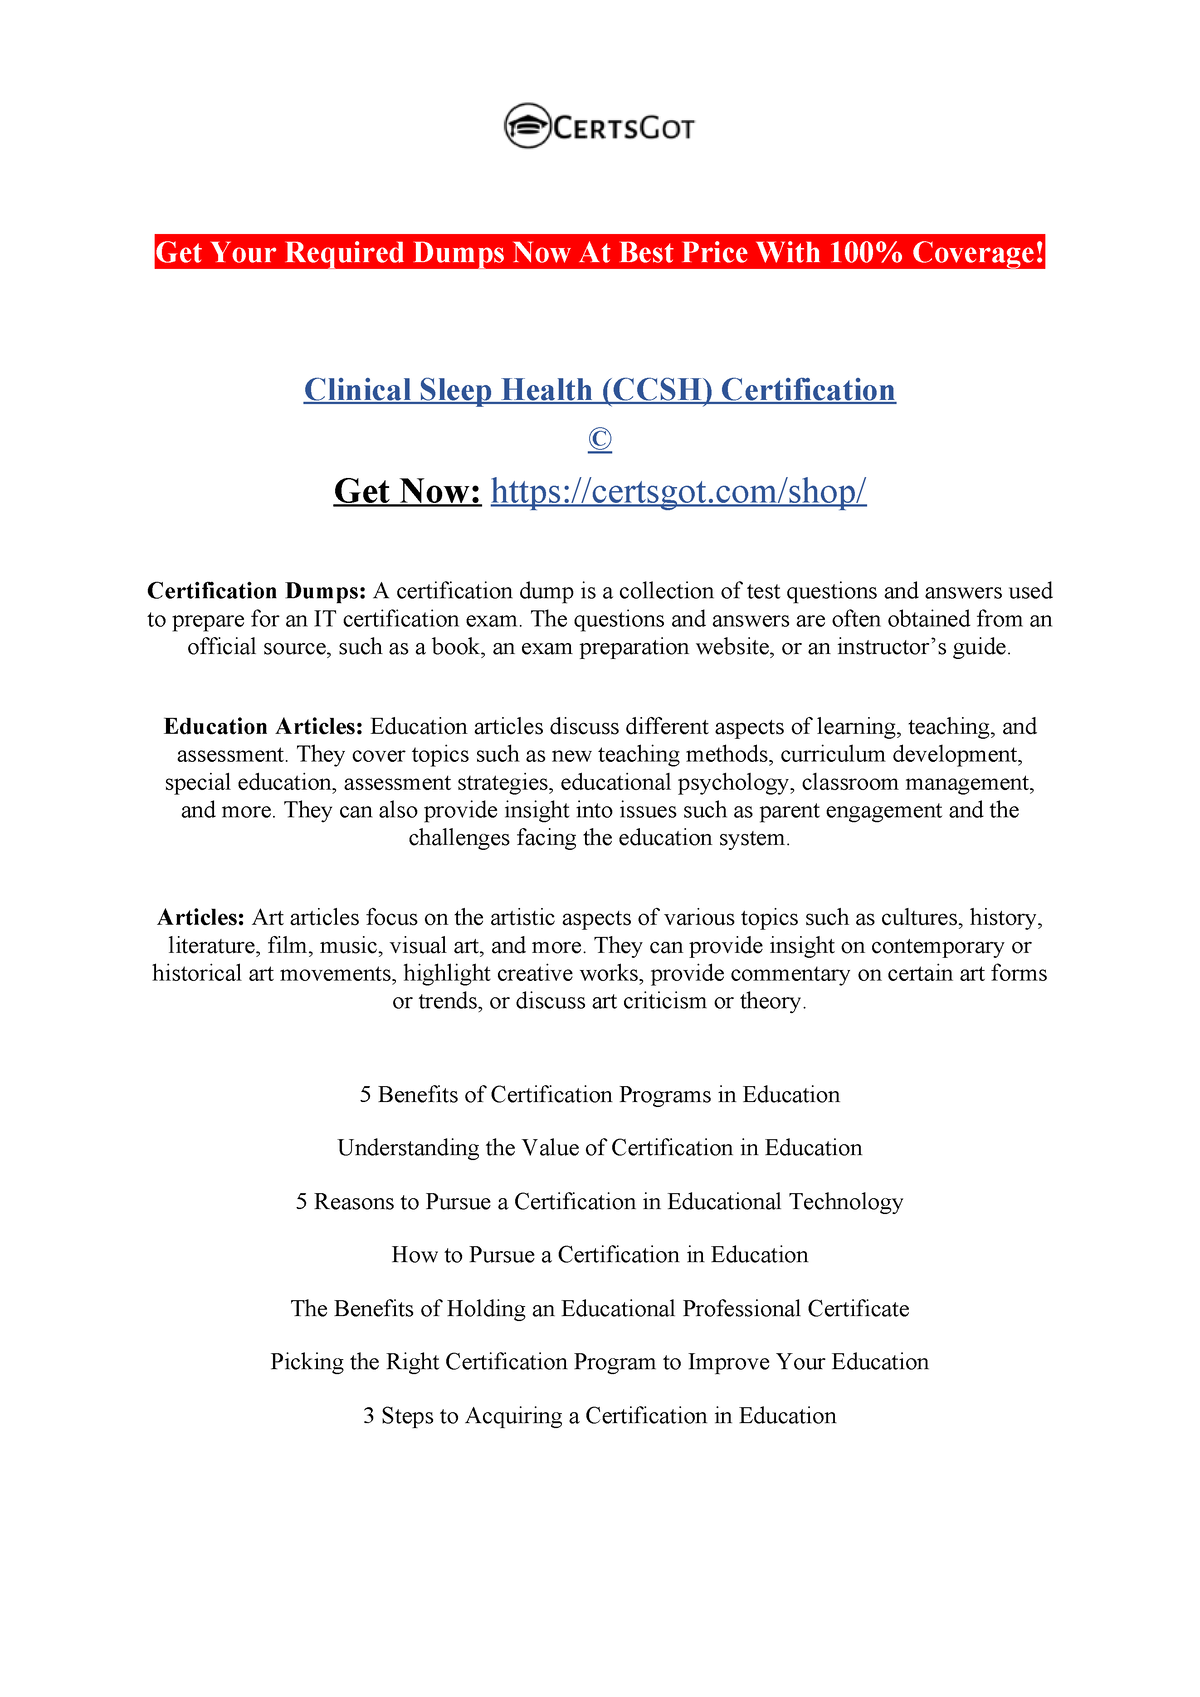 Clinical Sleep Health (CCSH) Certification Get Your Required Dumps